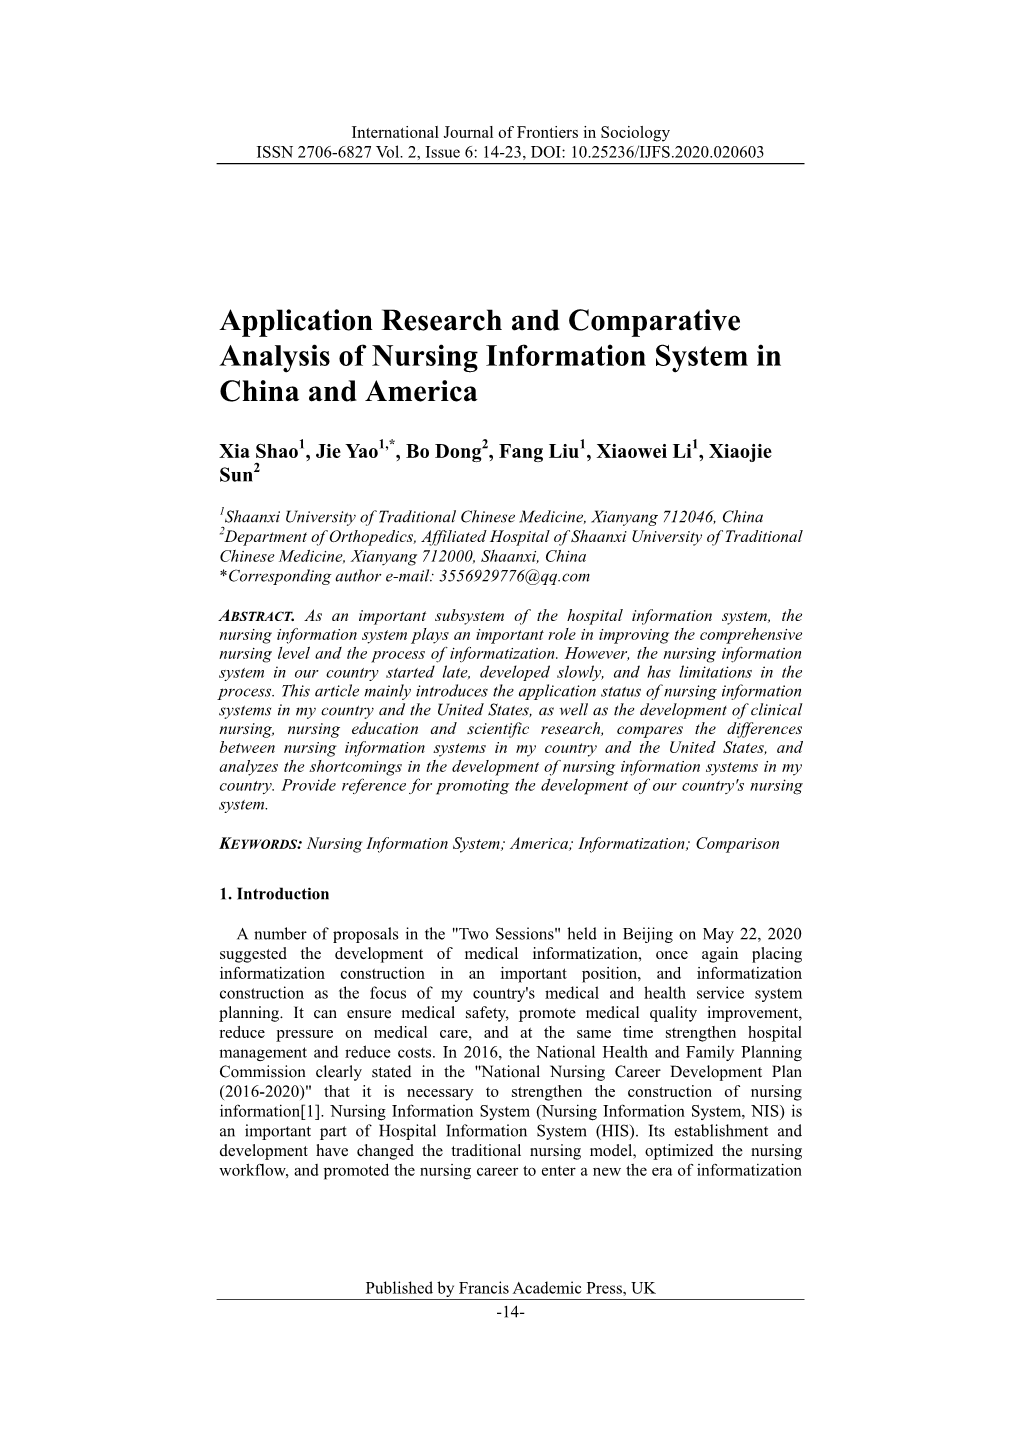 Application Research and Comparative Analysis of Nursing Information System in China and America